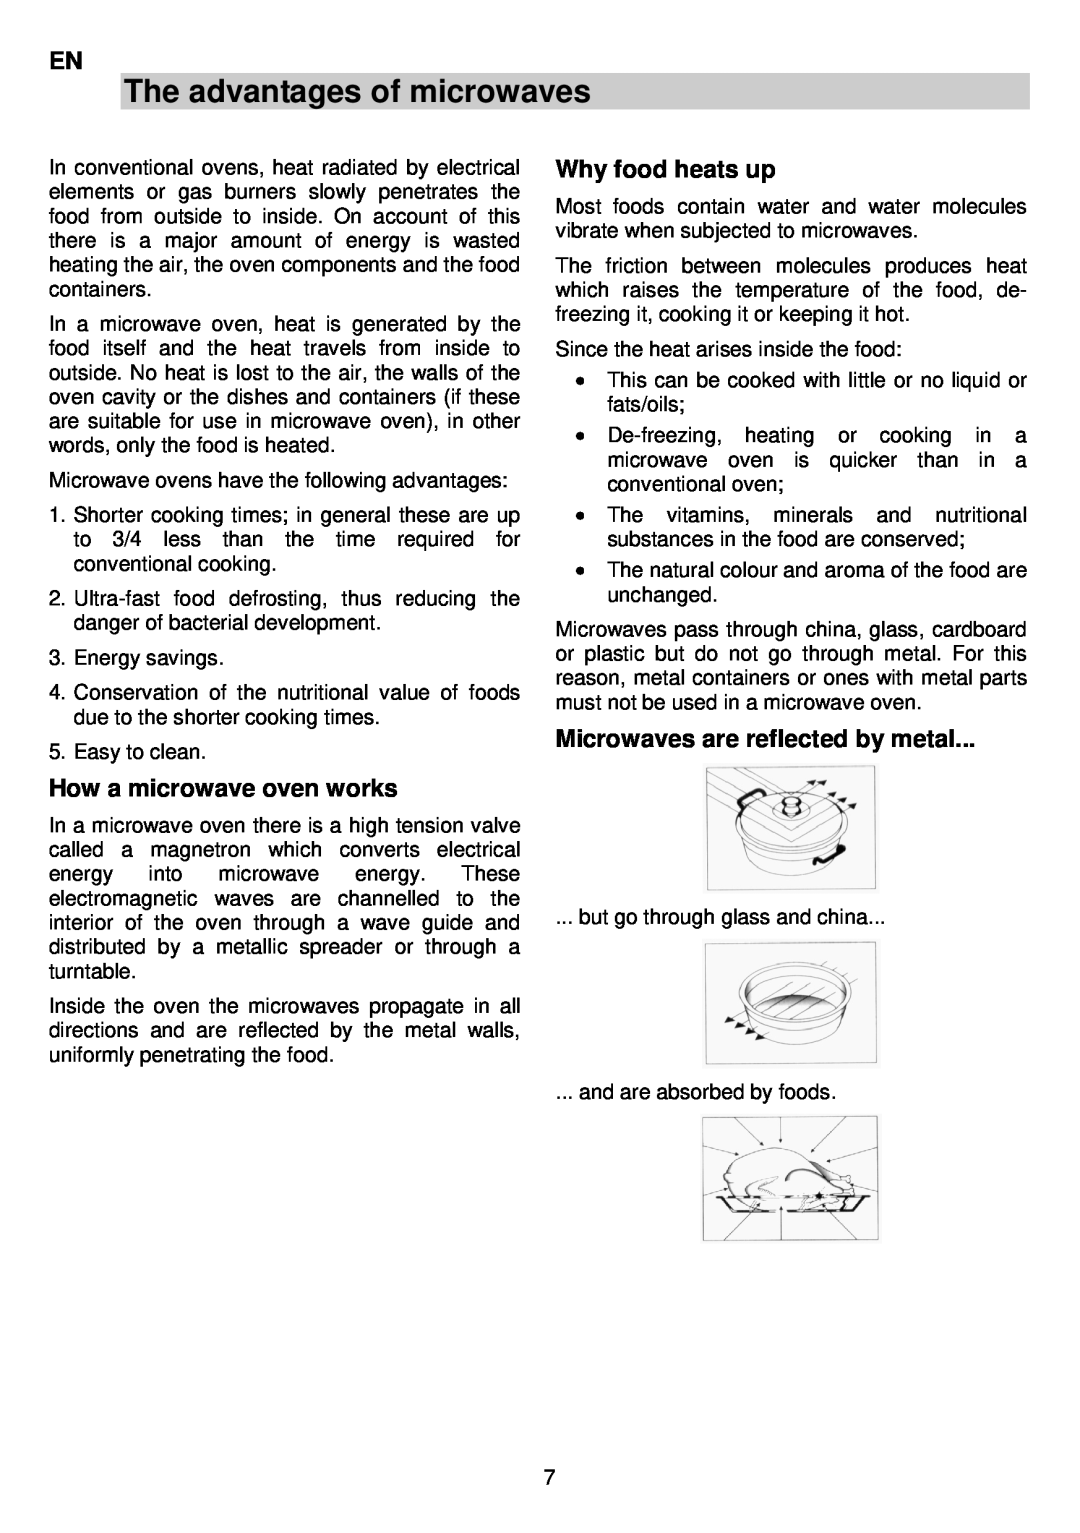 AEG MCC3880E-M user manual The advantages of microwaves, How a microwave oven works, Why food heats up 